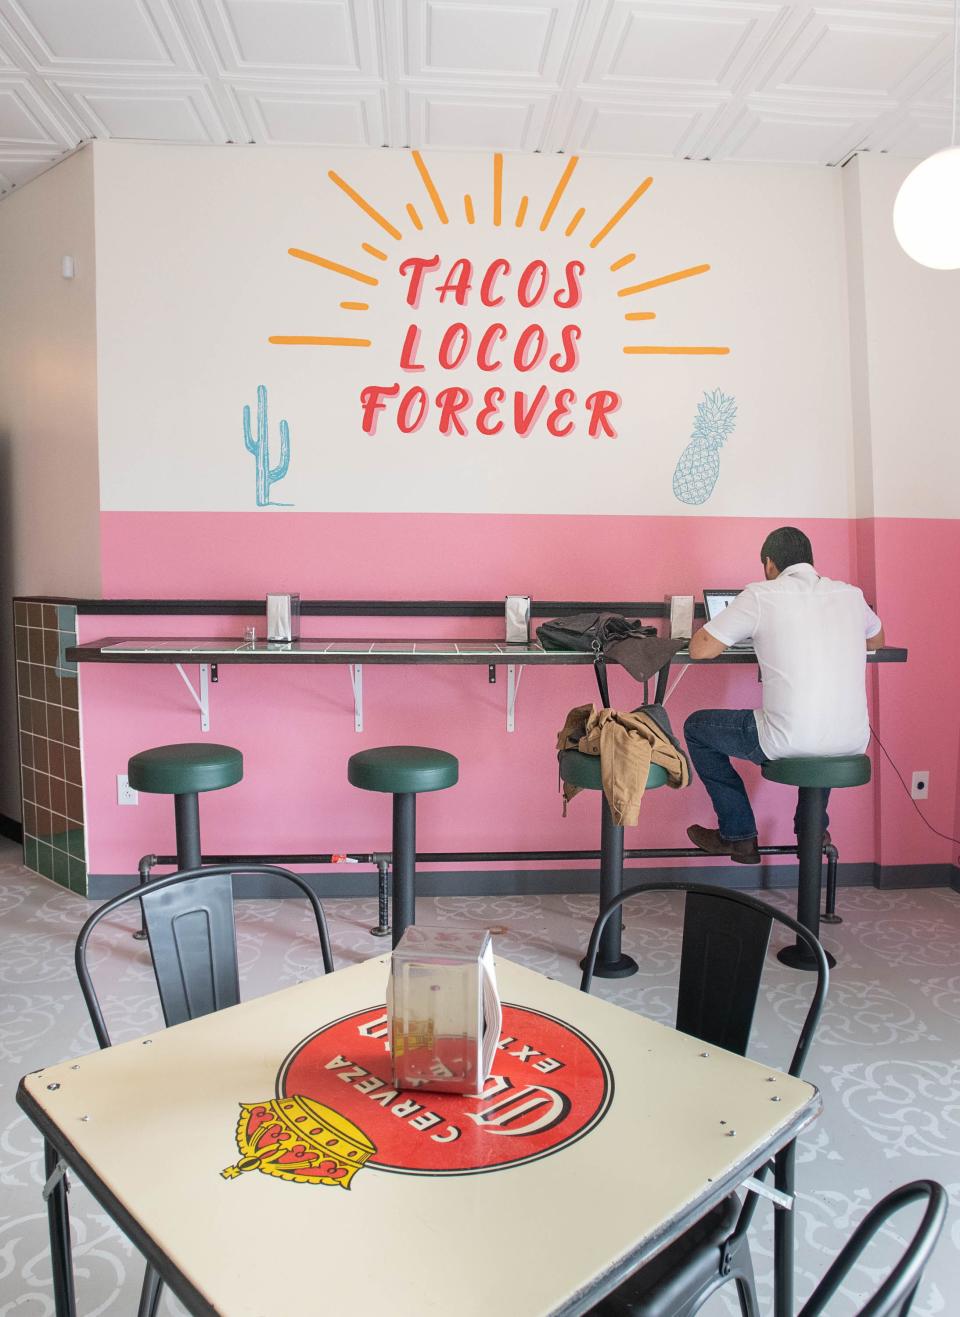 Gabriel Hernandez and Gabriela Ramirez have closed their Tacos Mexicanos brick and mortar location at 1014 Underwood Avenue in order to devote all their attention to the Tacos Mexicanos food truck.